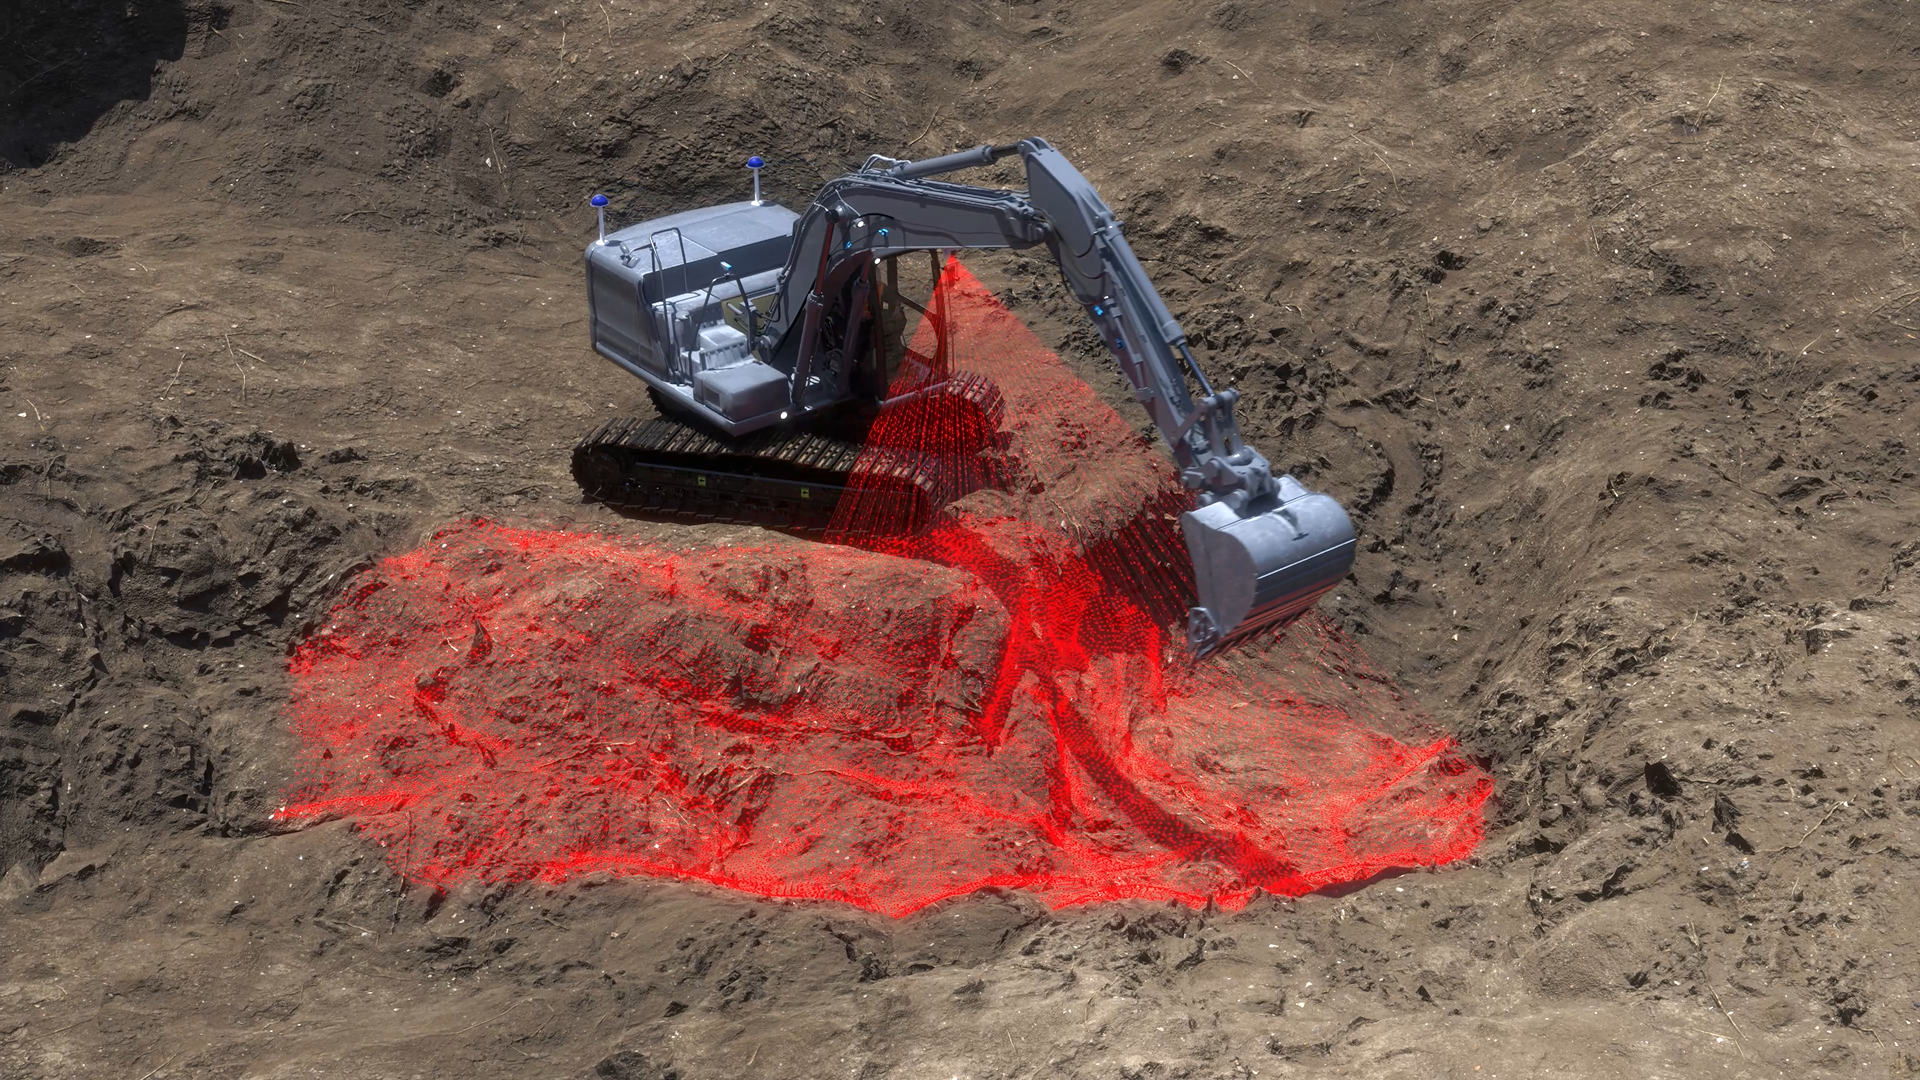 Sodex constructs solution to building industry’s excavation problem with help of IMU and GNSS sensors